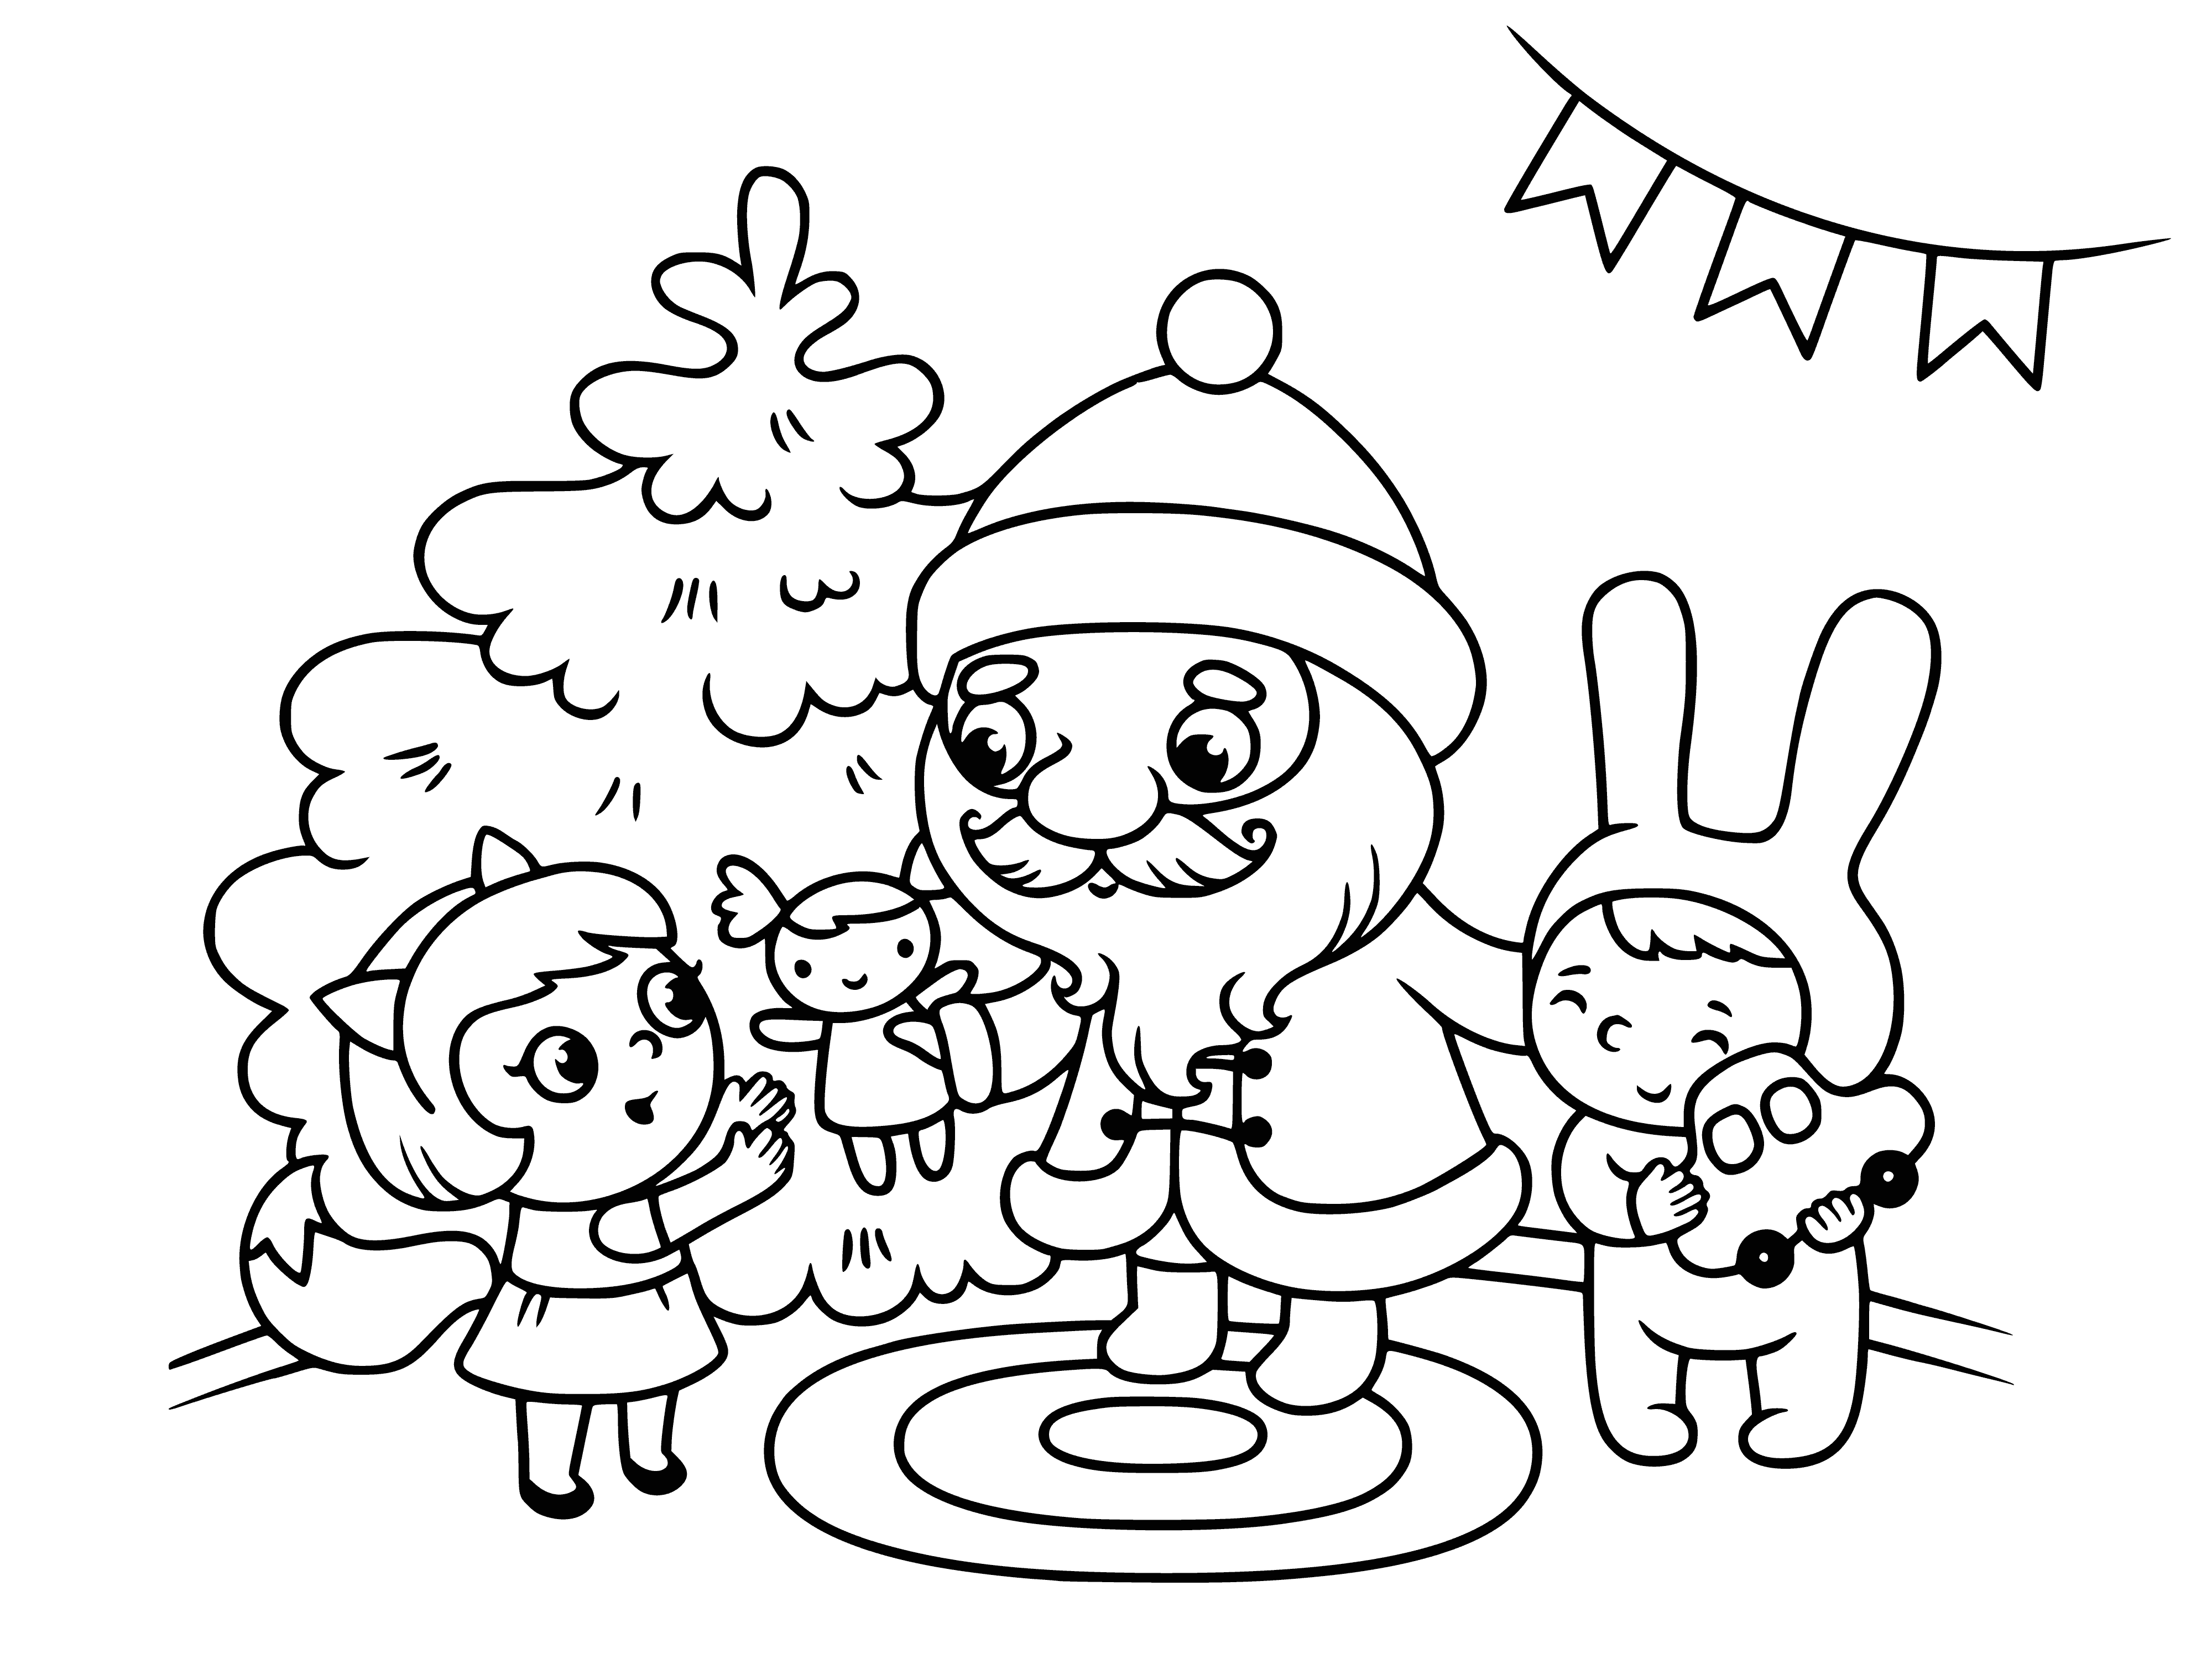 coloring page: Santa Claus is an elderly man in red attire carrying a sack of presents and a candy cane. #Christmas